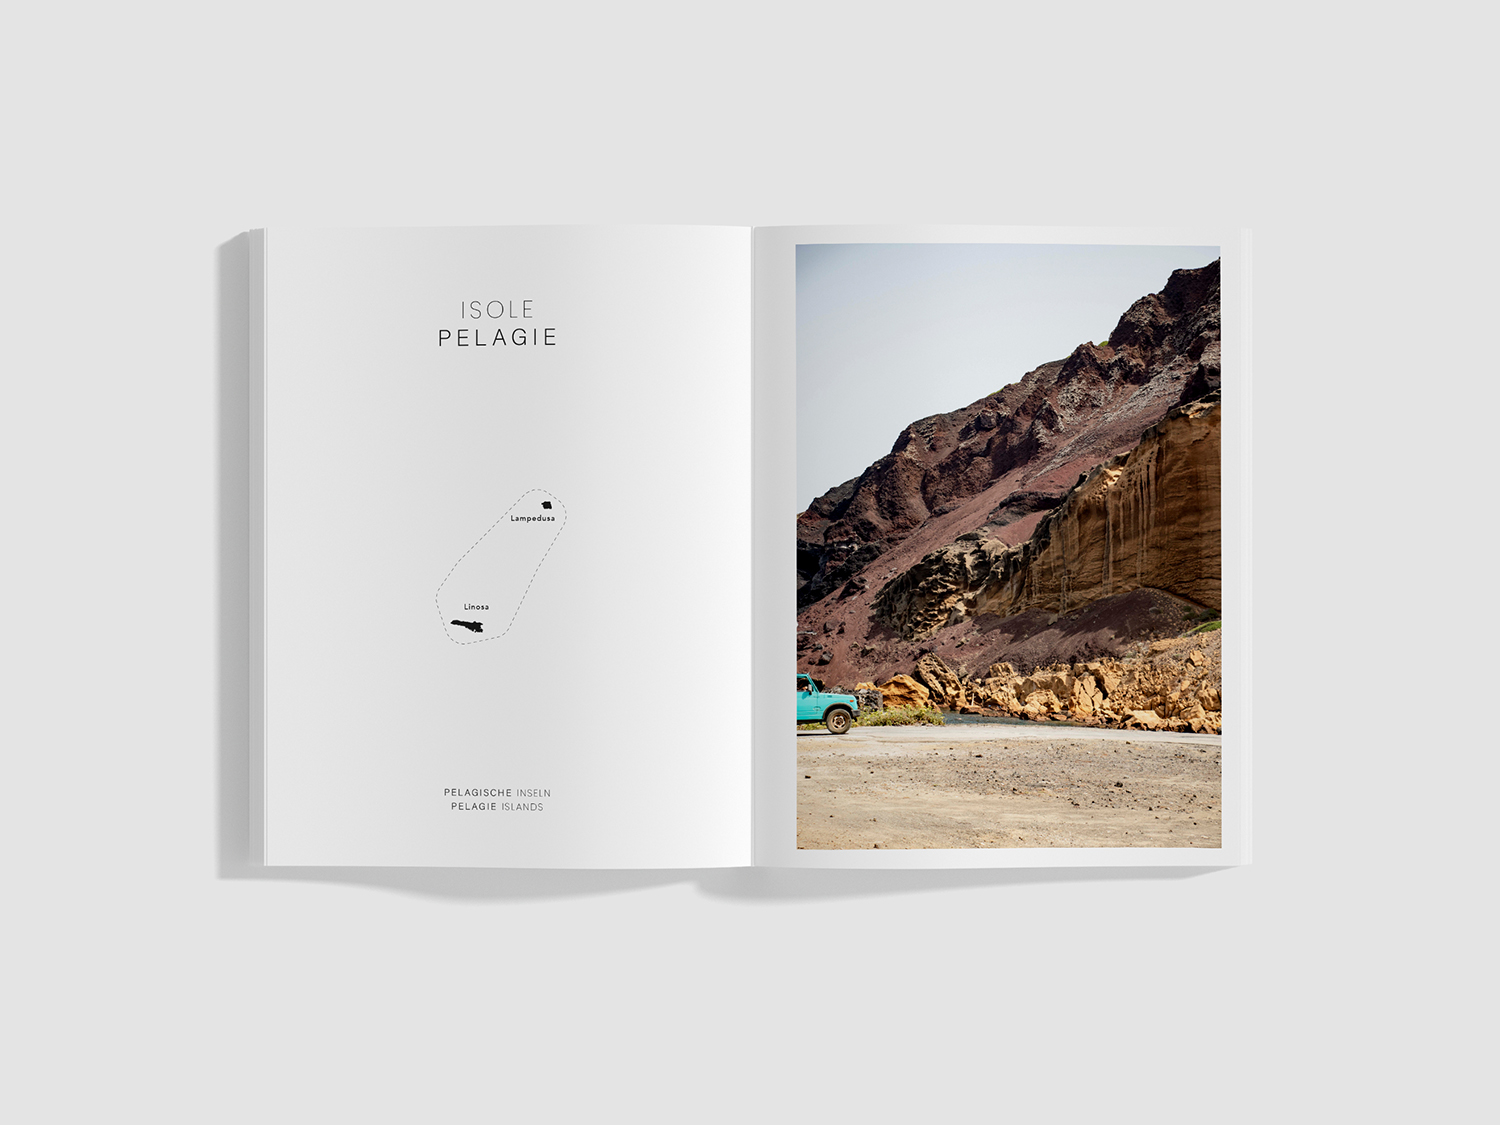 Archisearch ARCHIPELAGO: a photographic journey into the Mediterranean, the architecture of its islands and their identities by Corinna Del Bianco